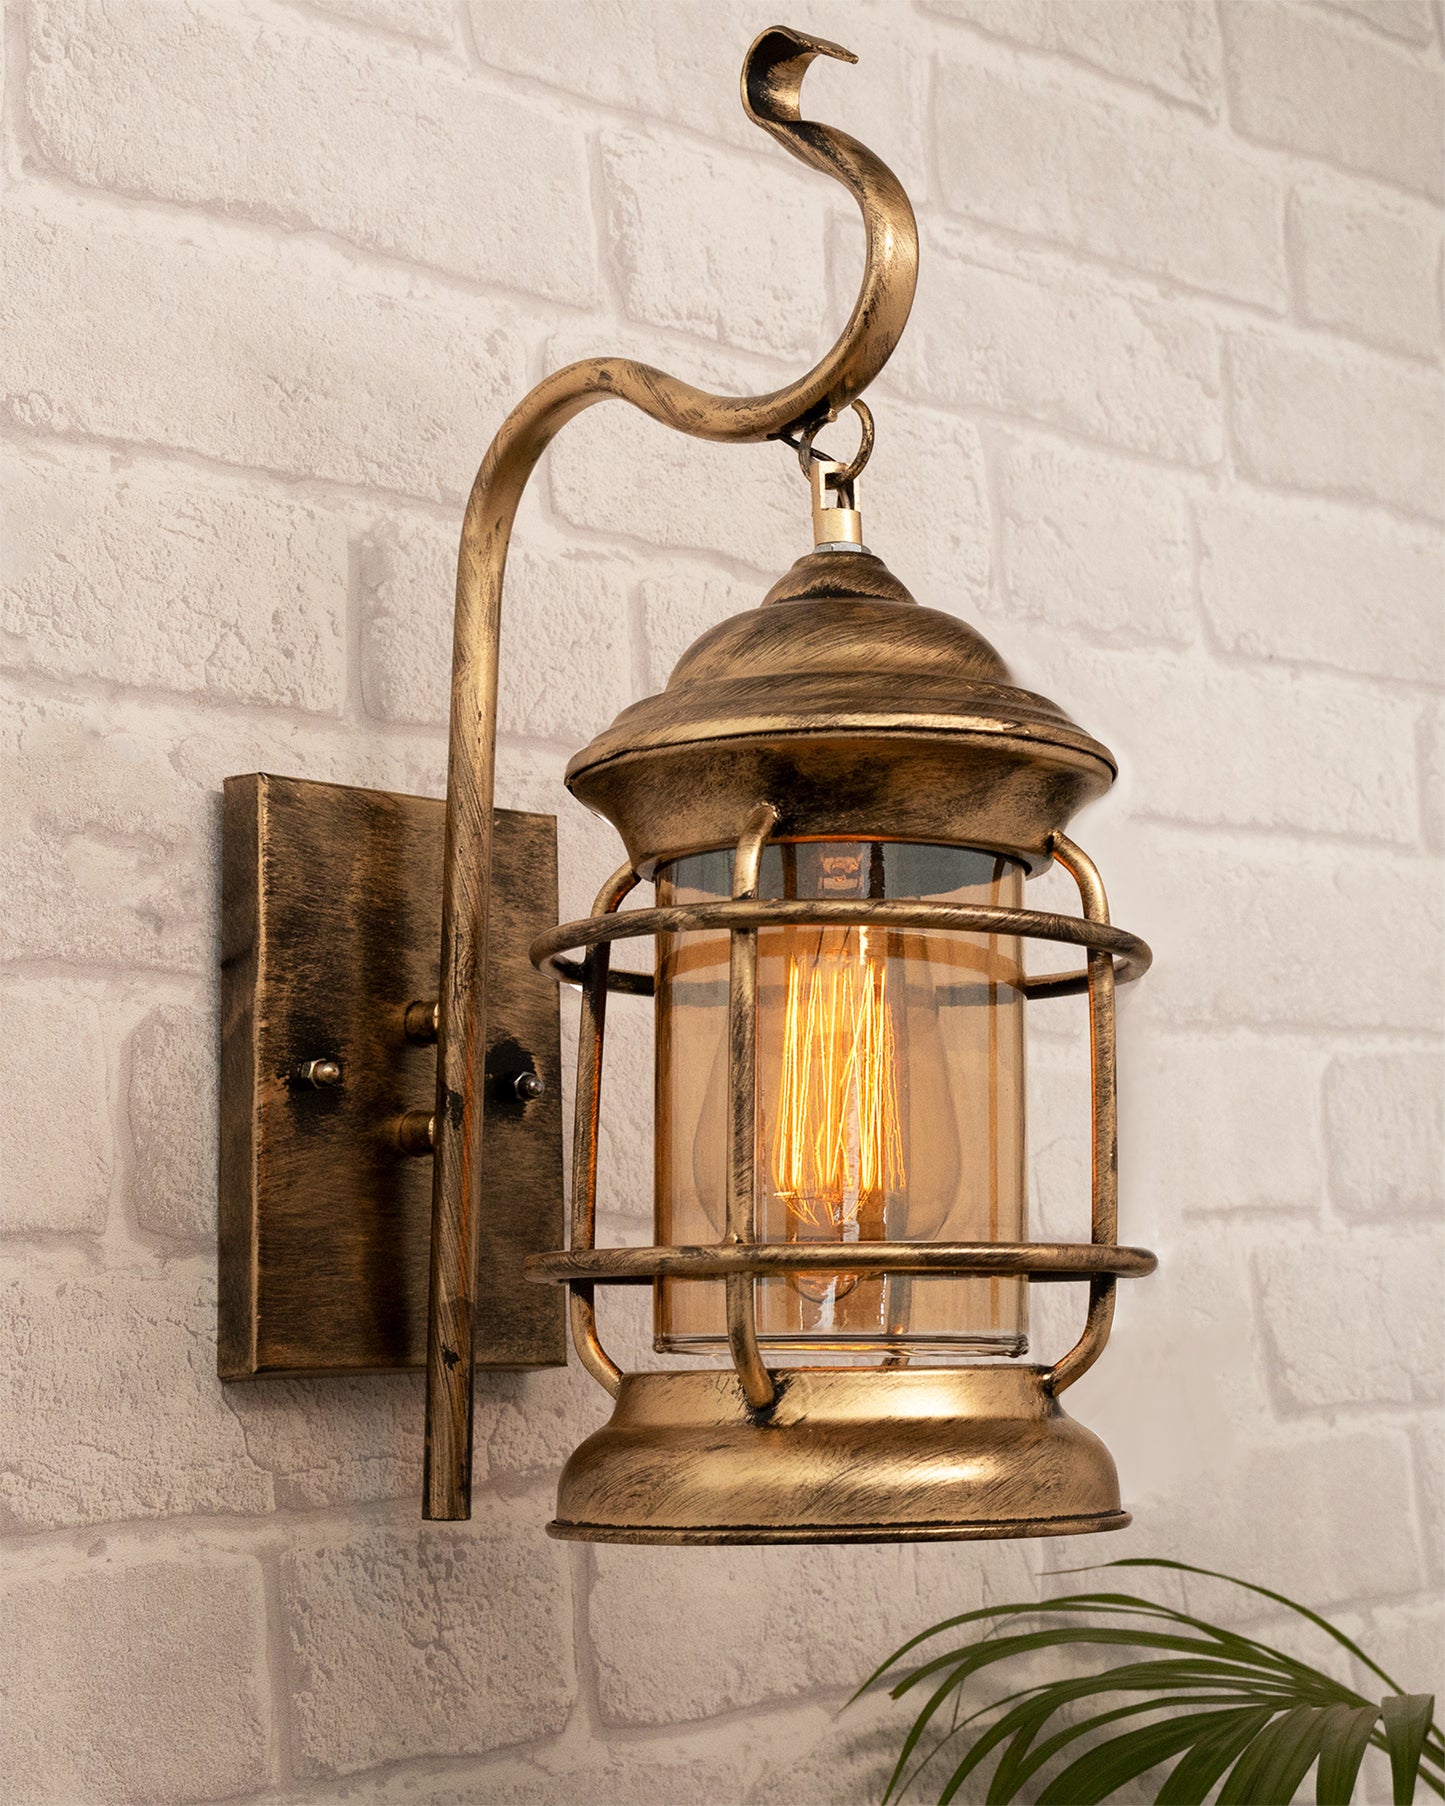 Rustic Wall Light Fixtures, Oil Rubbed Bronze Finish Indoor Vintage Wall Sconce Industrial Lamp Fixture Glass Shade Farmhouse Metal Sconces for Bedroom Living Room Cafe, Wall Cage Cylinder